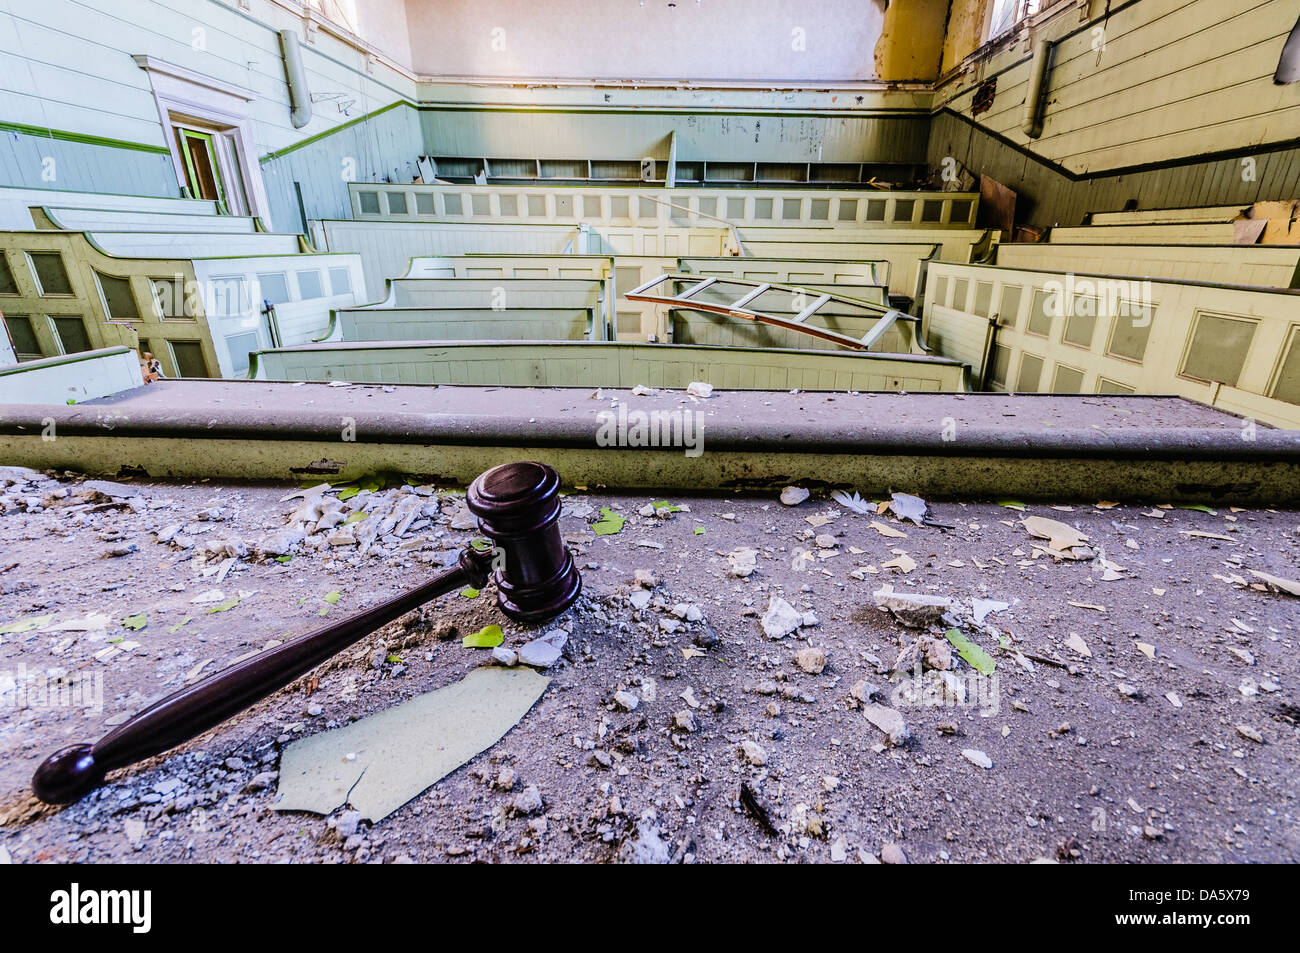 Judge's gavel lying on the bench of a derelict court room Stock Photo